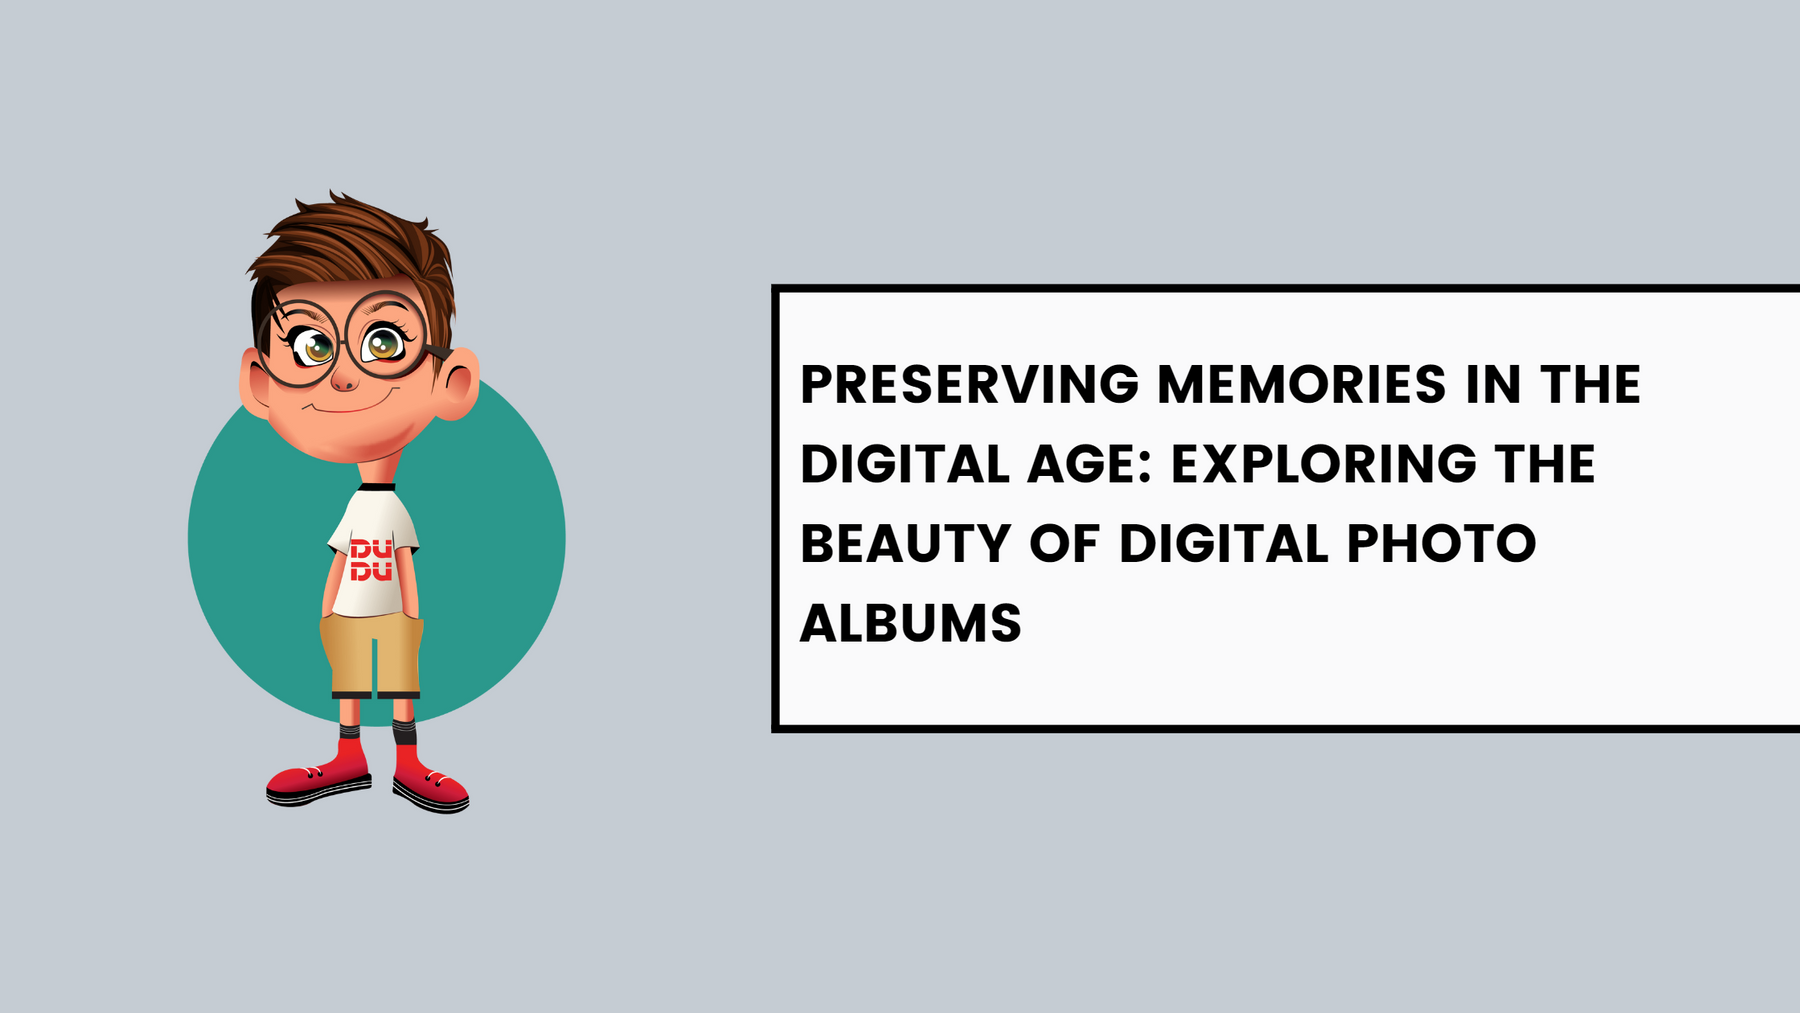 Preserving Memories in the Digital Age: Exploring the Beauty of Digital Photo Albums